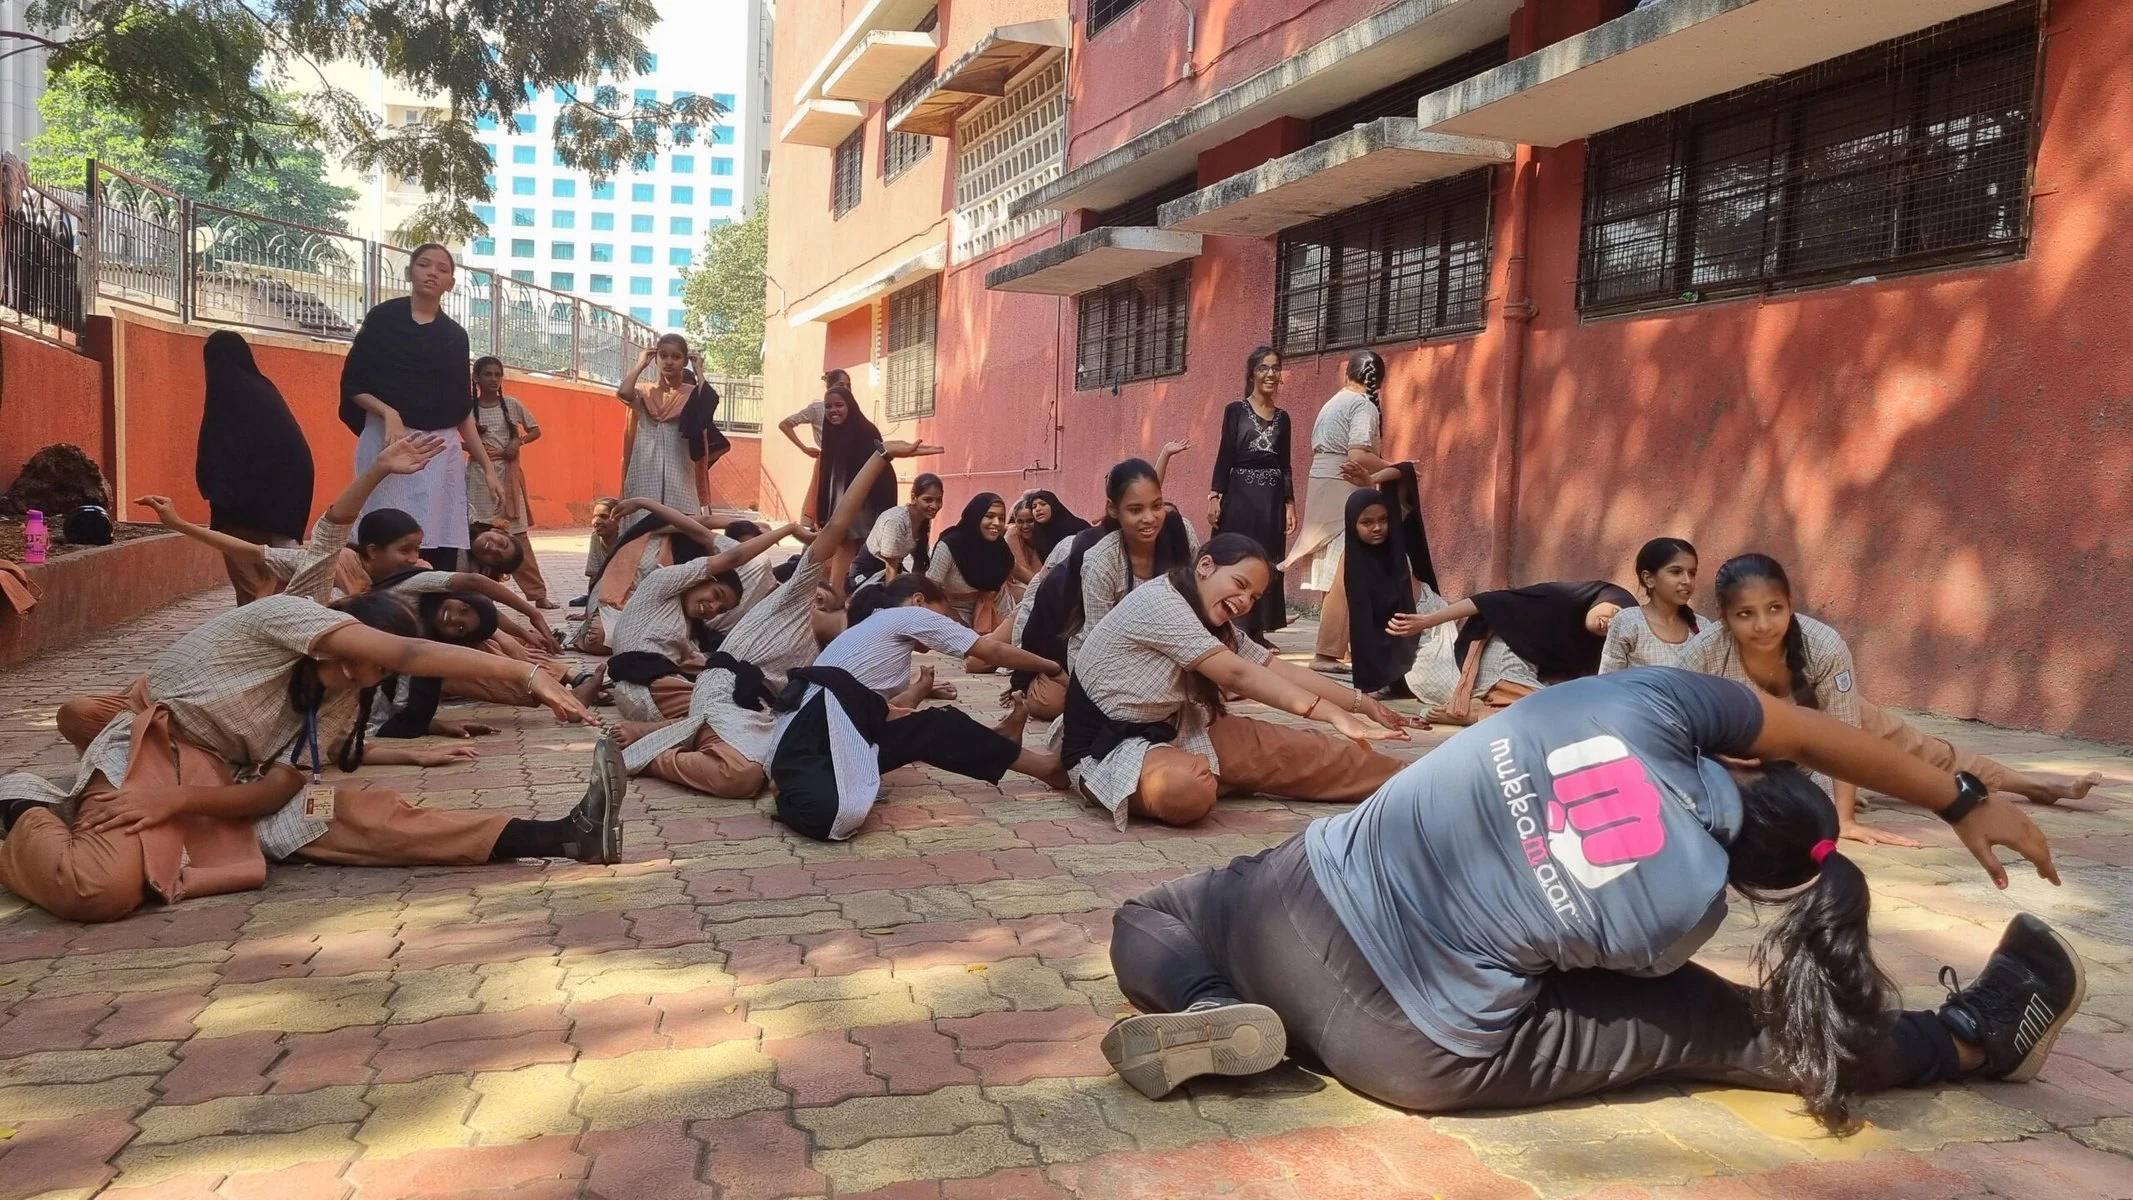 A group of girls doing stretches on a patio.